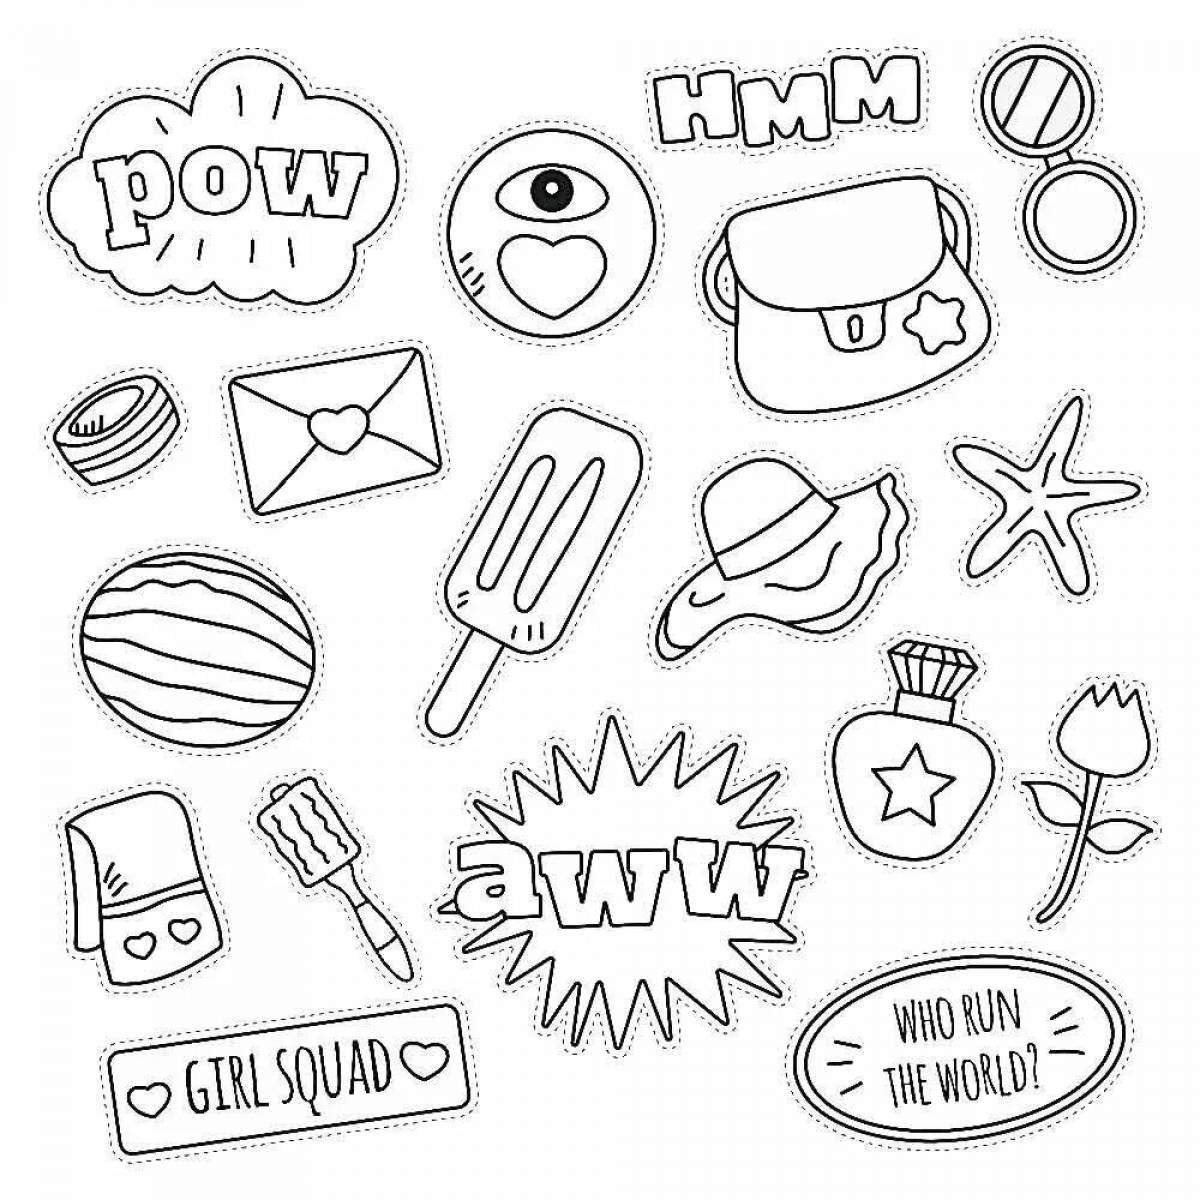 Mini drawings for making stickers #13